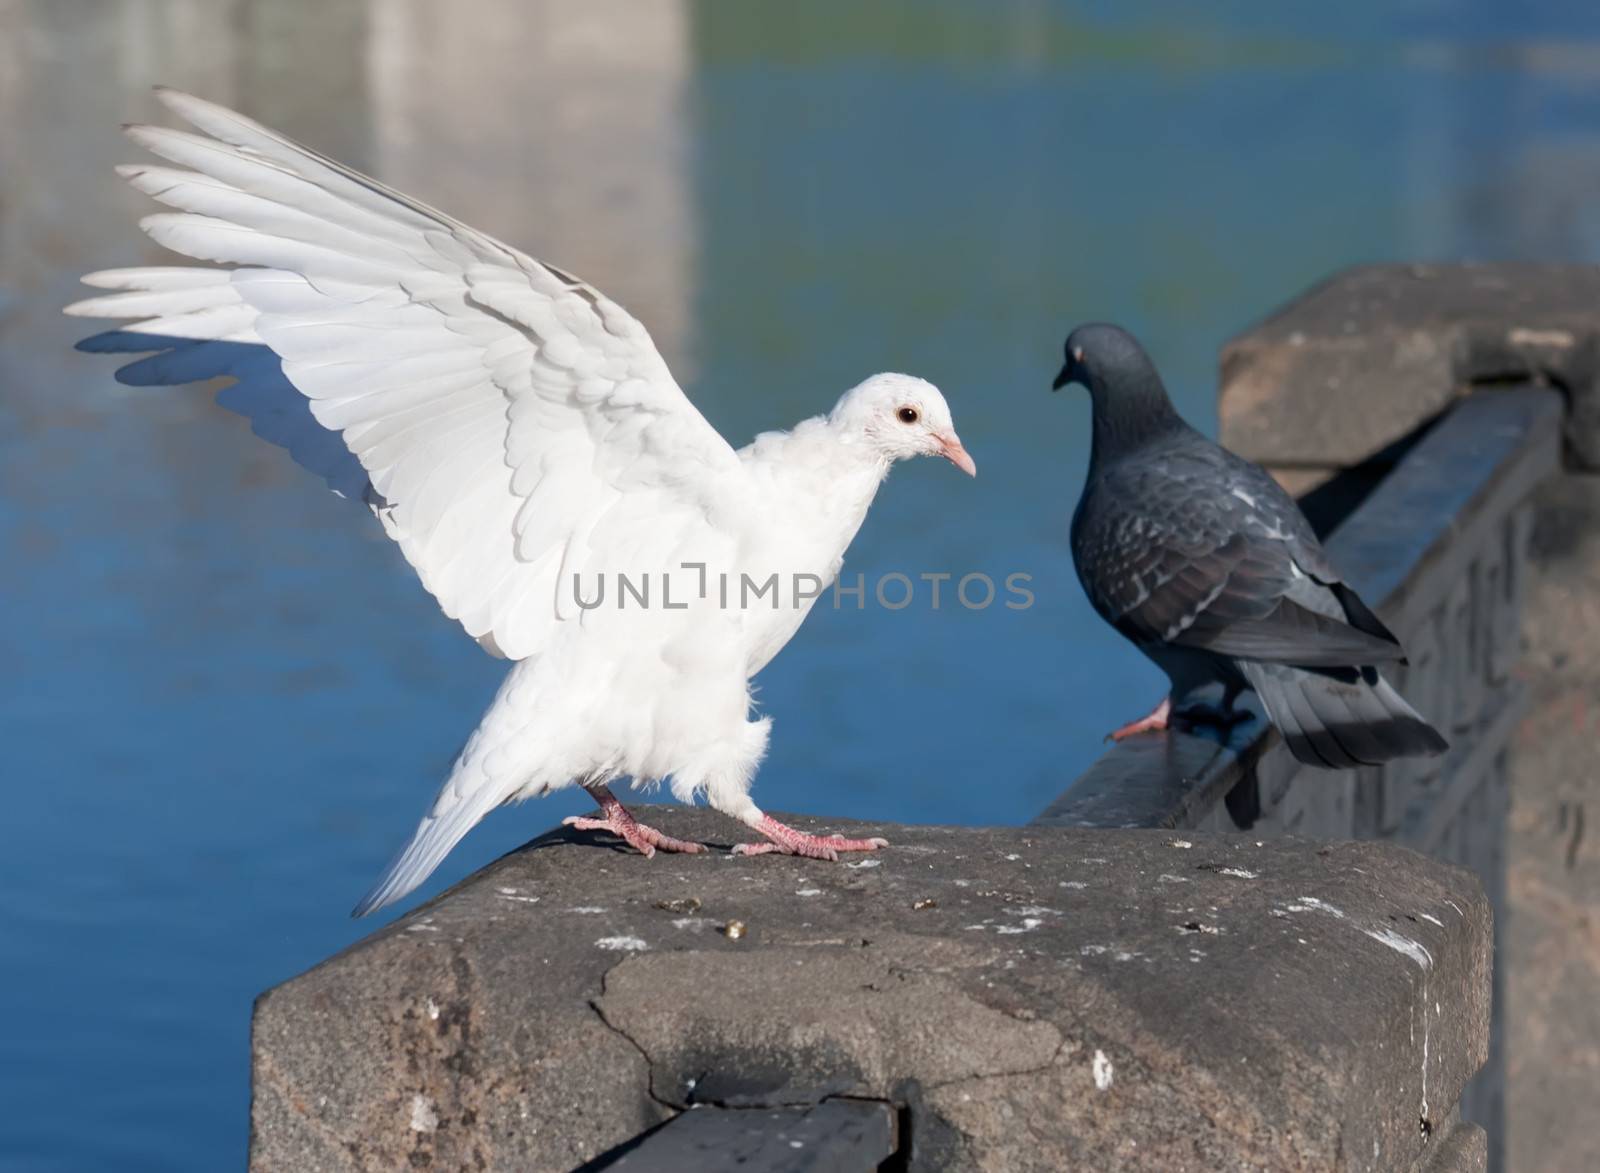 Nice close-up photo of white flying pigeon